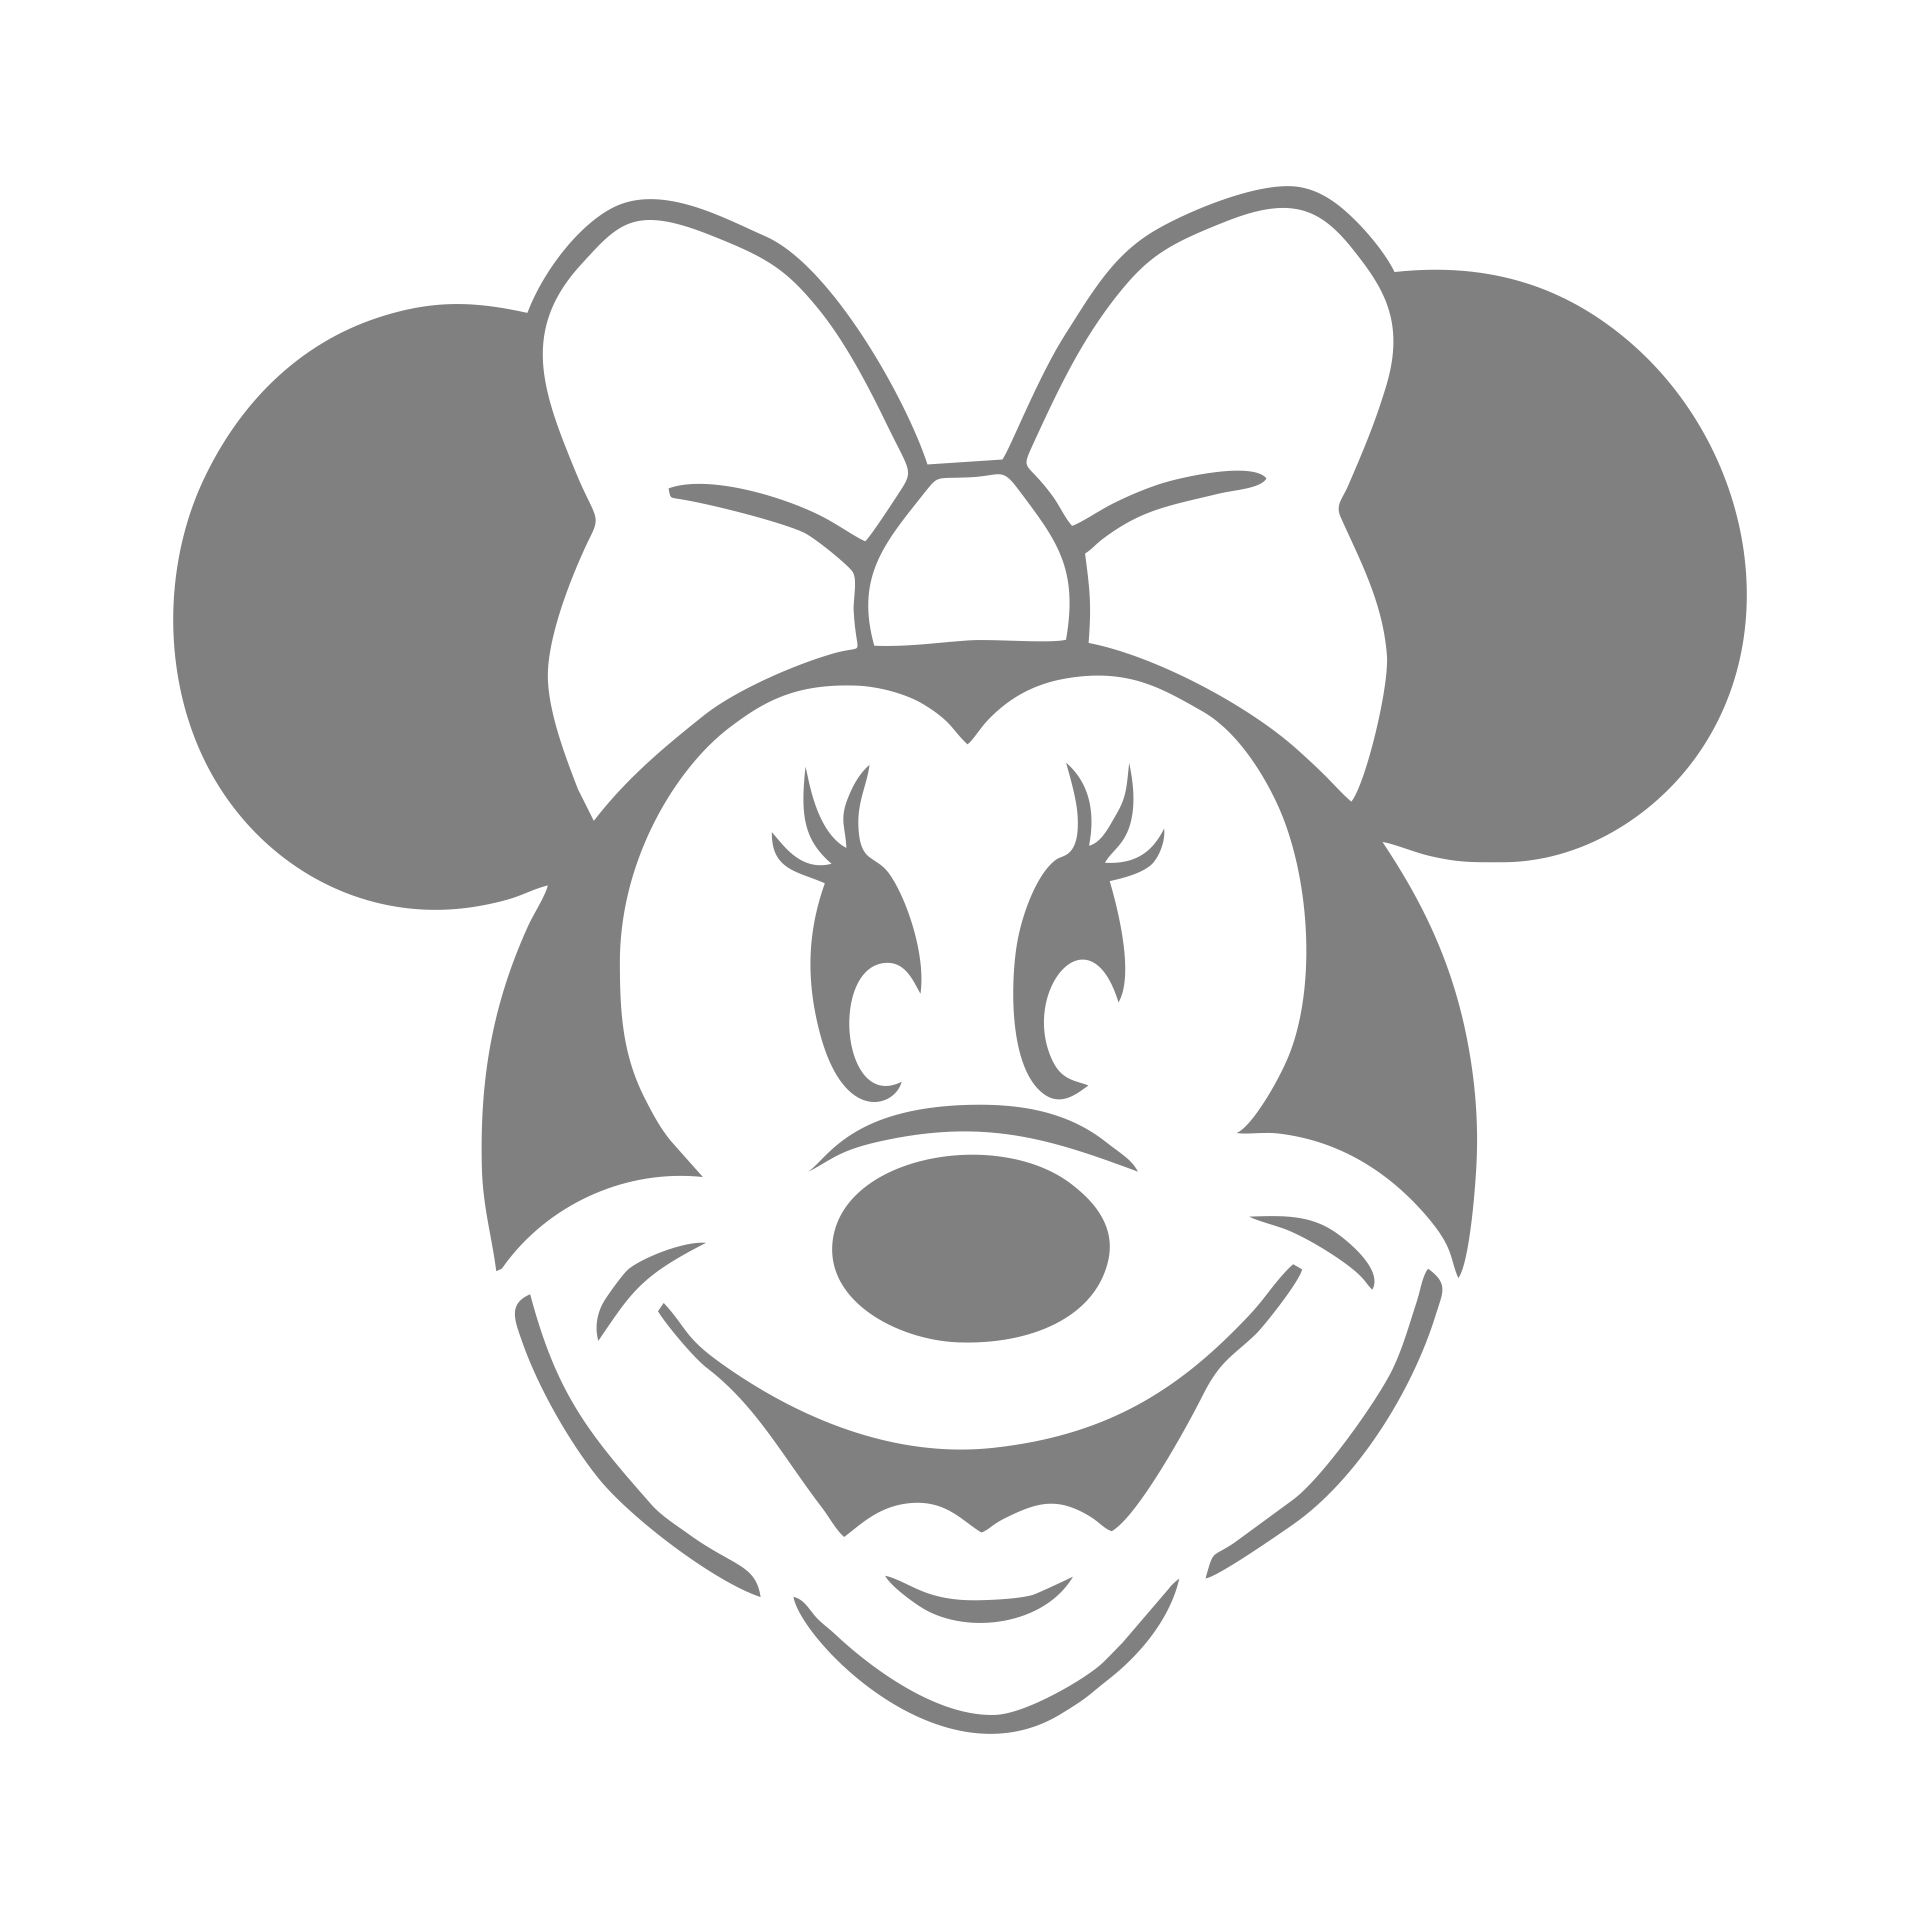 6 Best Images of Minnie Mouse Stencil Printable Minnie Mouse Pumpkin